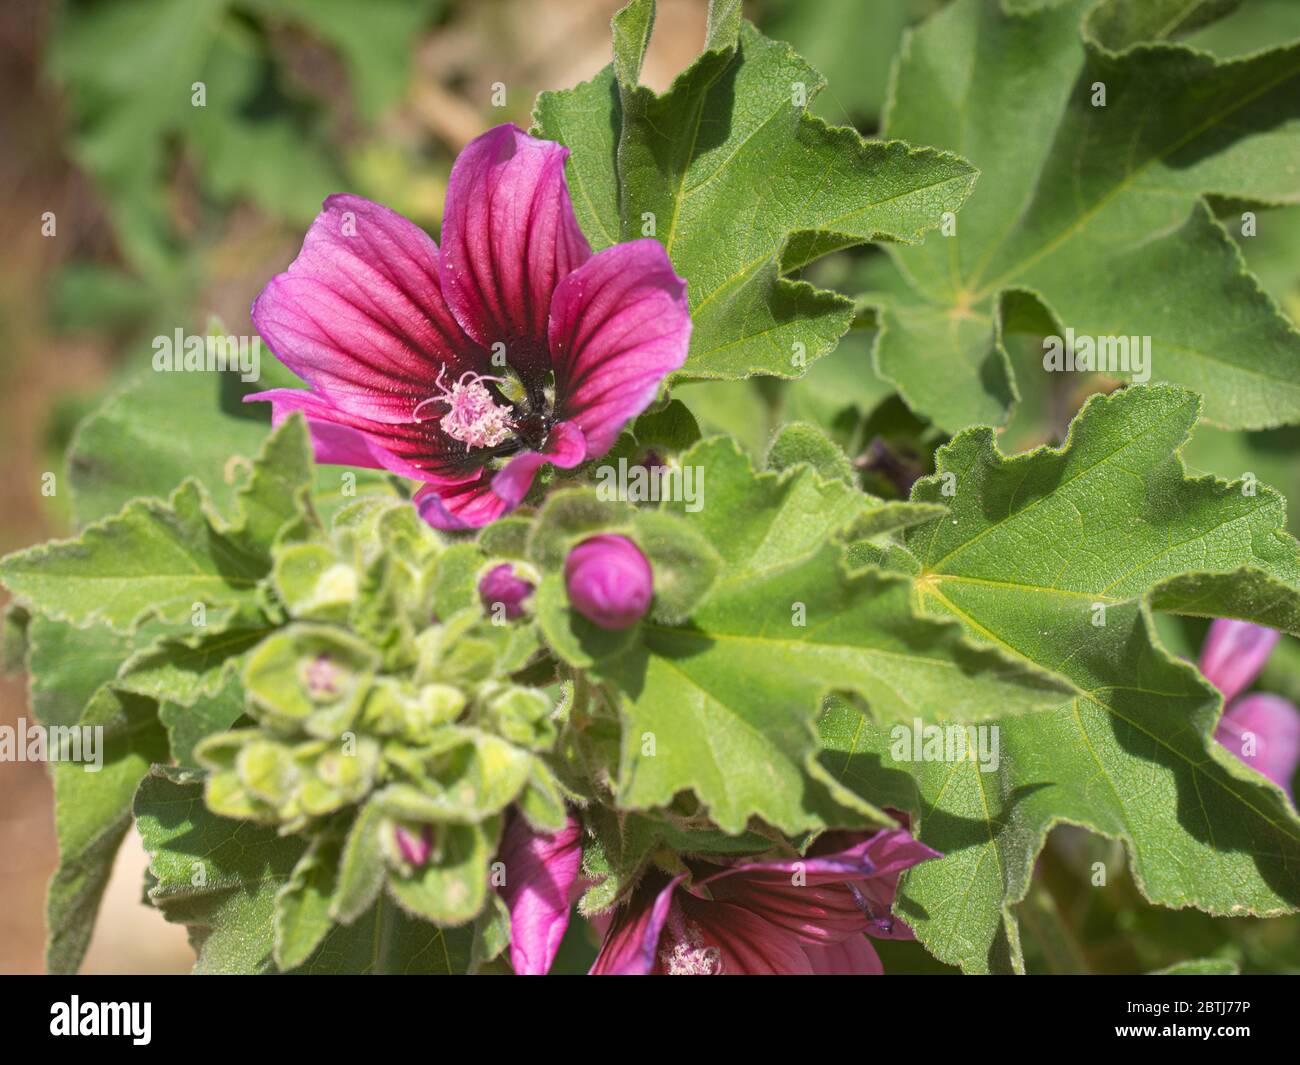 Pink hibiscus cannabinus flower blooming in forest ith green leaves on background,commonly known as Indian Hemp flower. Stock Photo